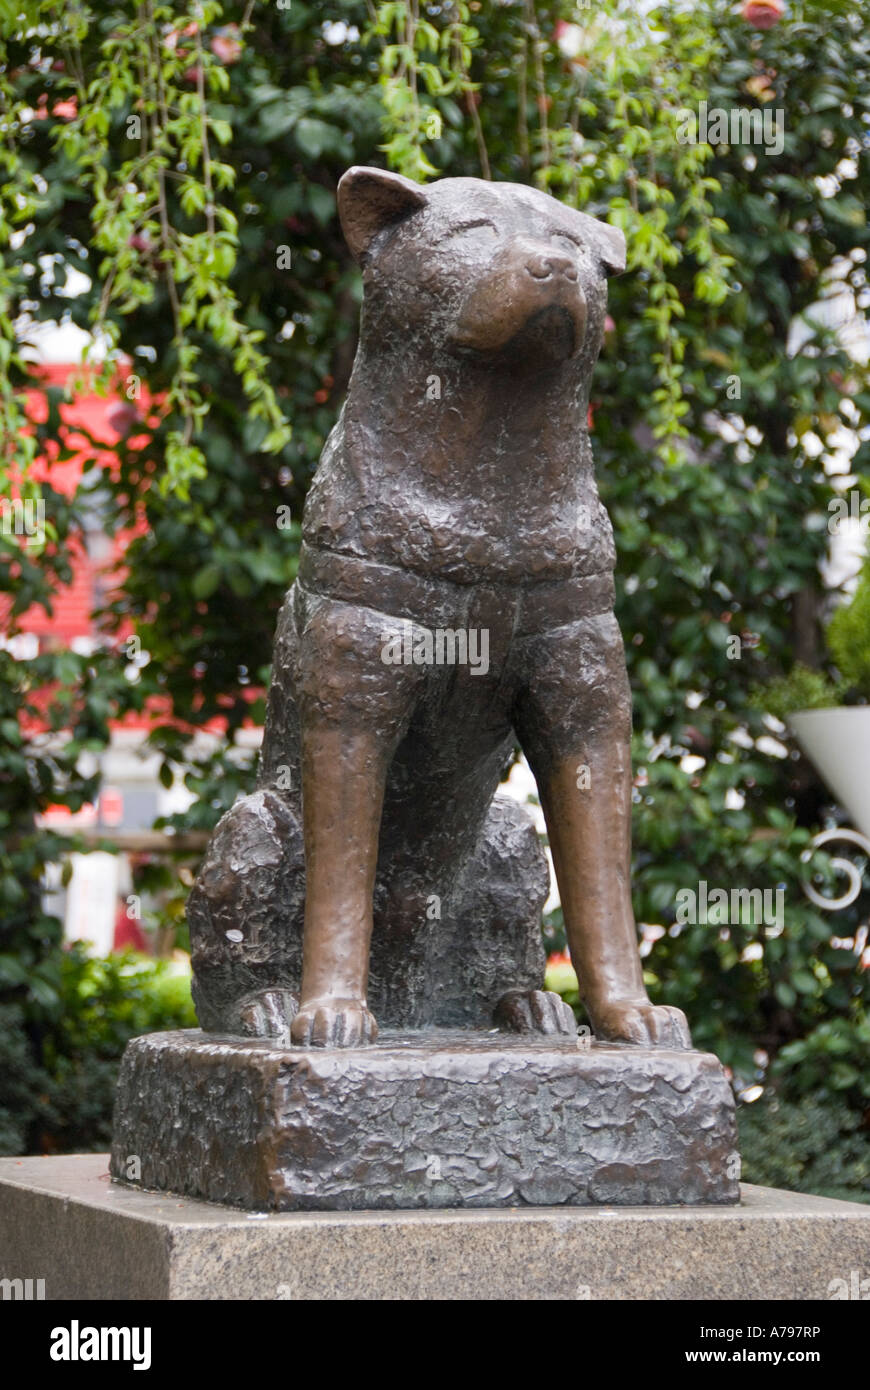 Statue of Hachiko a famous meeting place in Shibuya Tokyo Japan Stock Photo